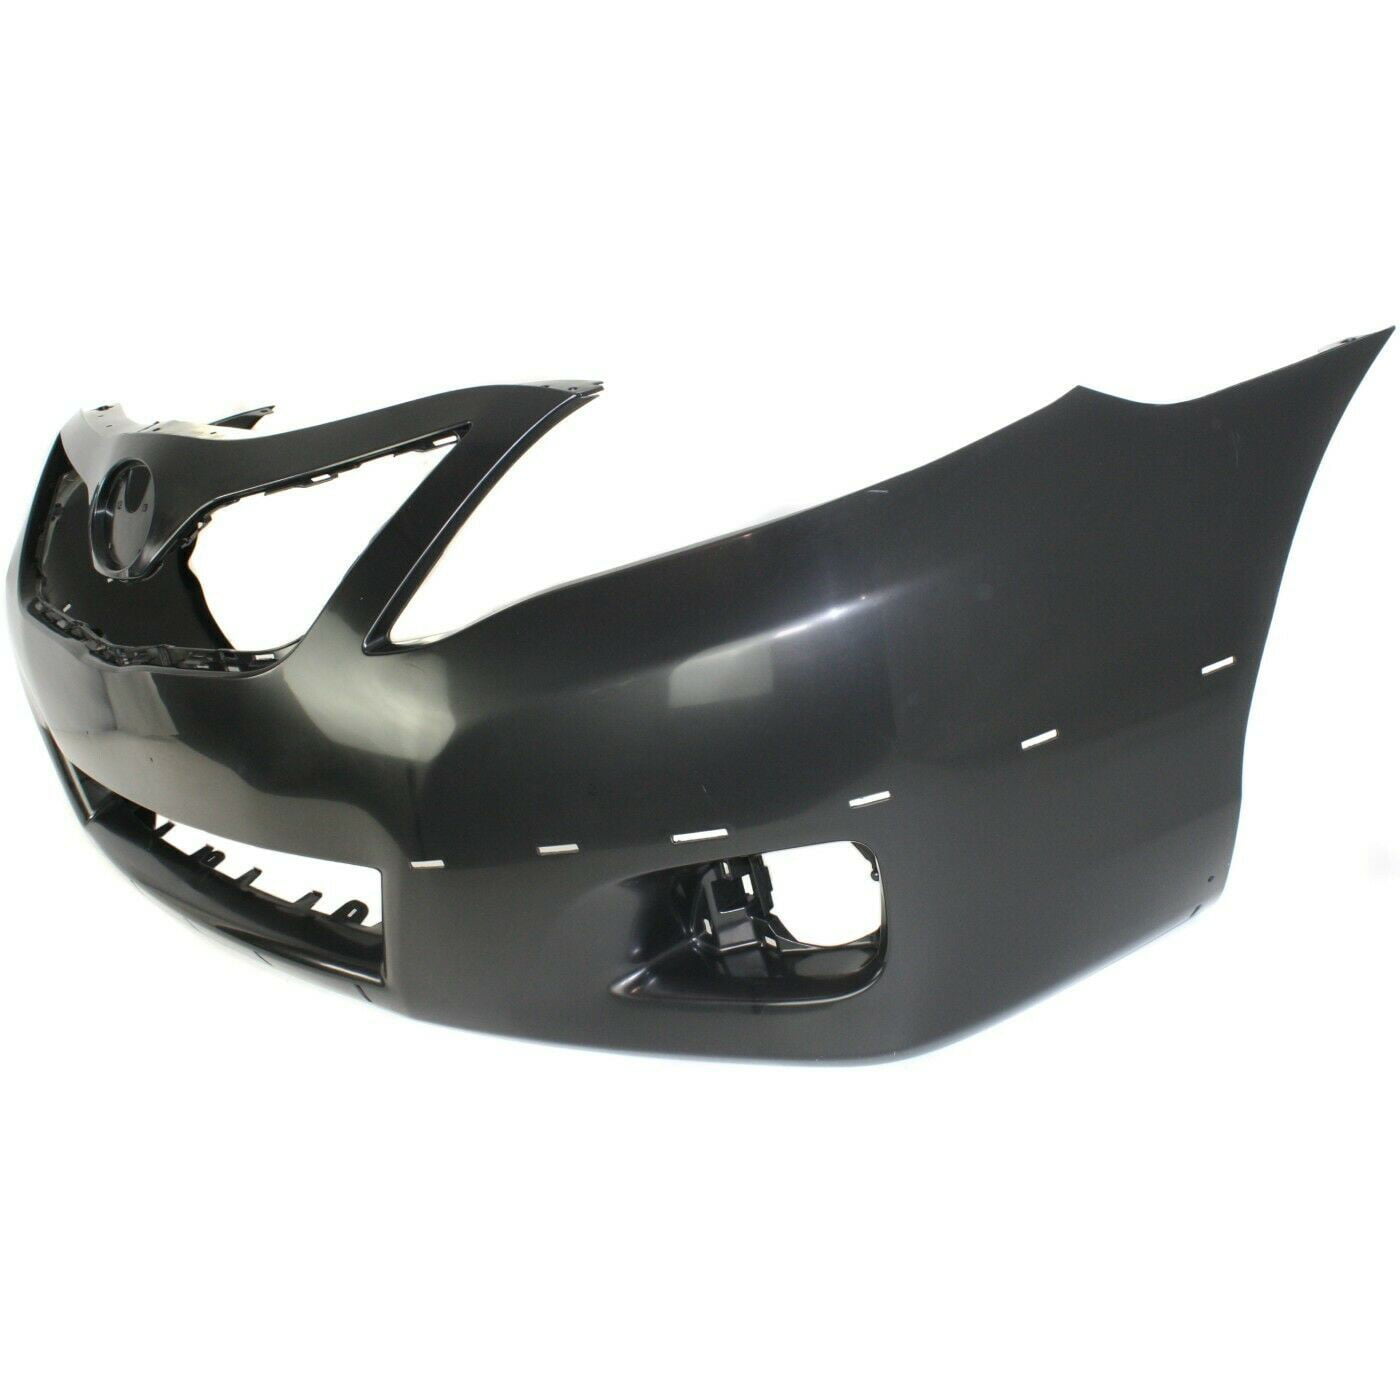 SE Model New Front Bumper Cover For 2010-2011 Toyota Camry USA Without Jack Hole TO1000355 5211906959 With Spoiler Holes